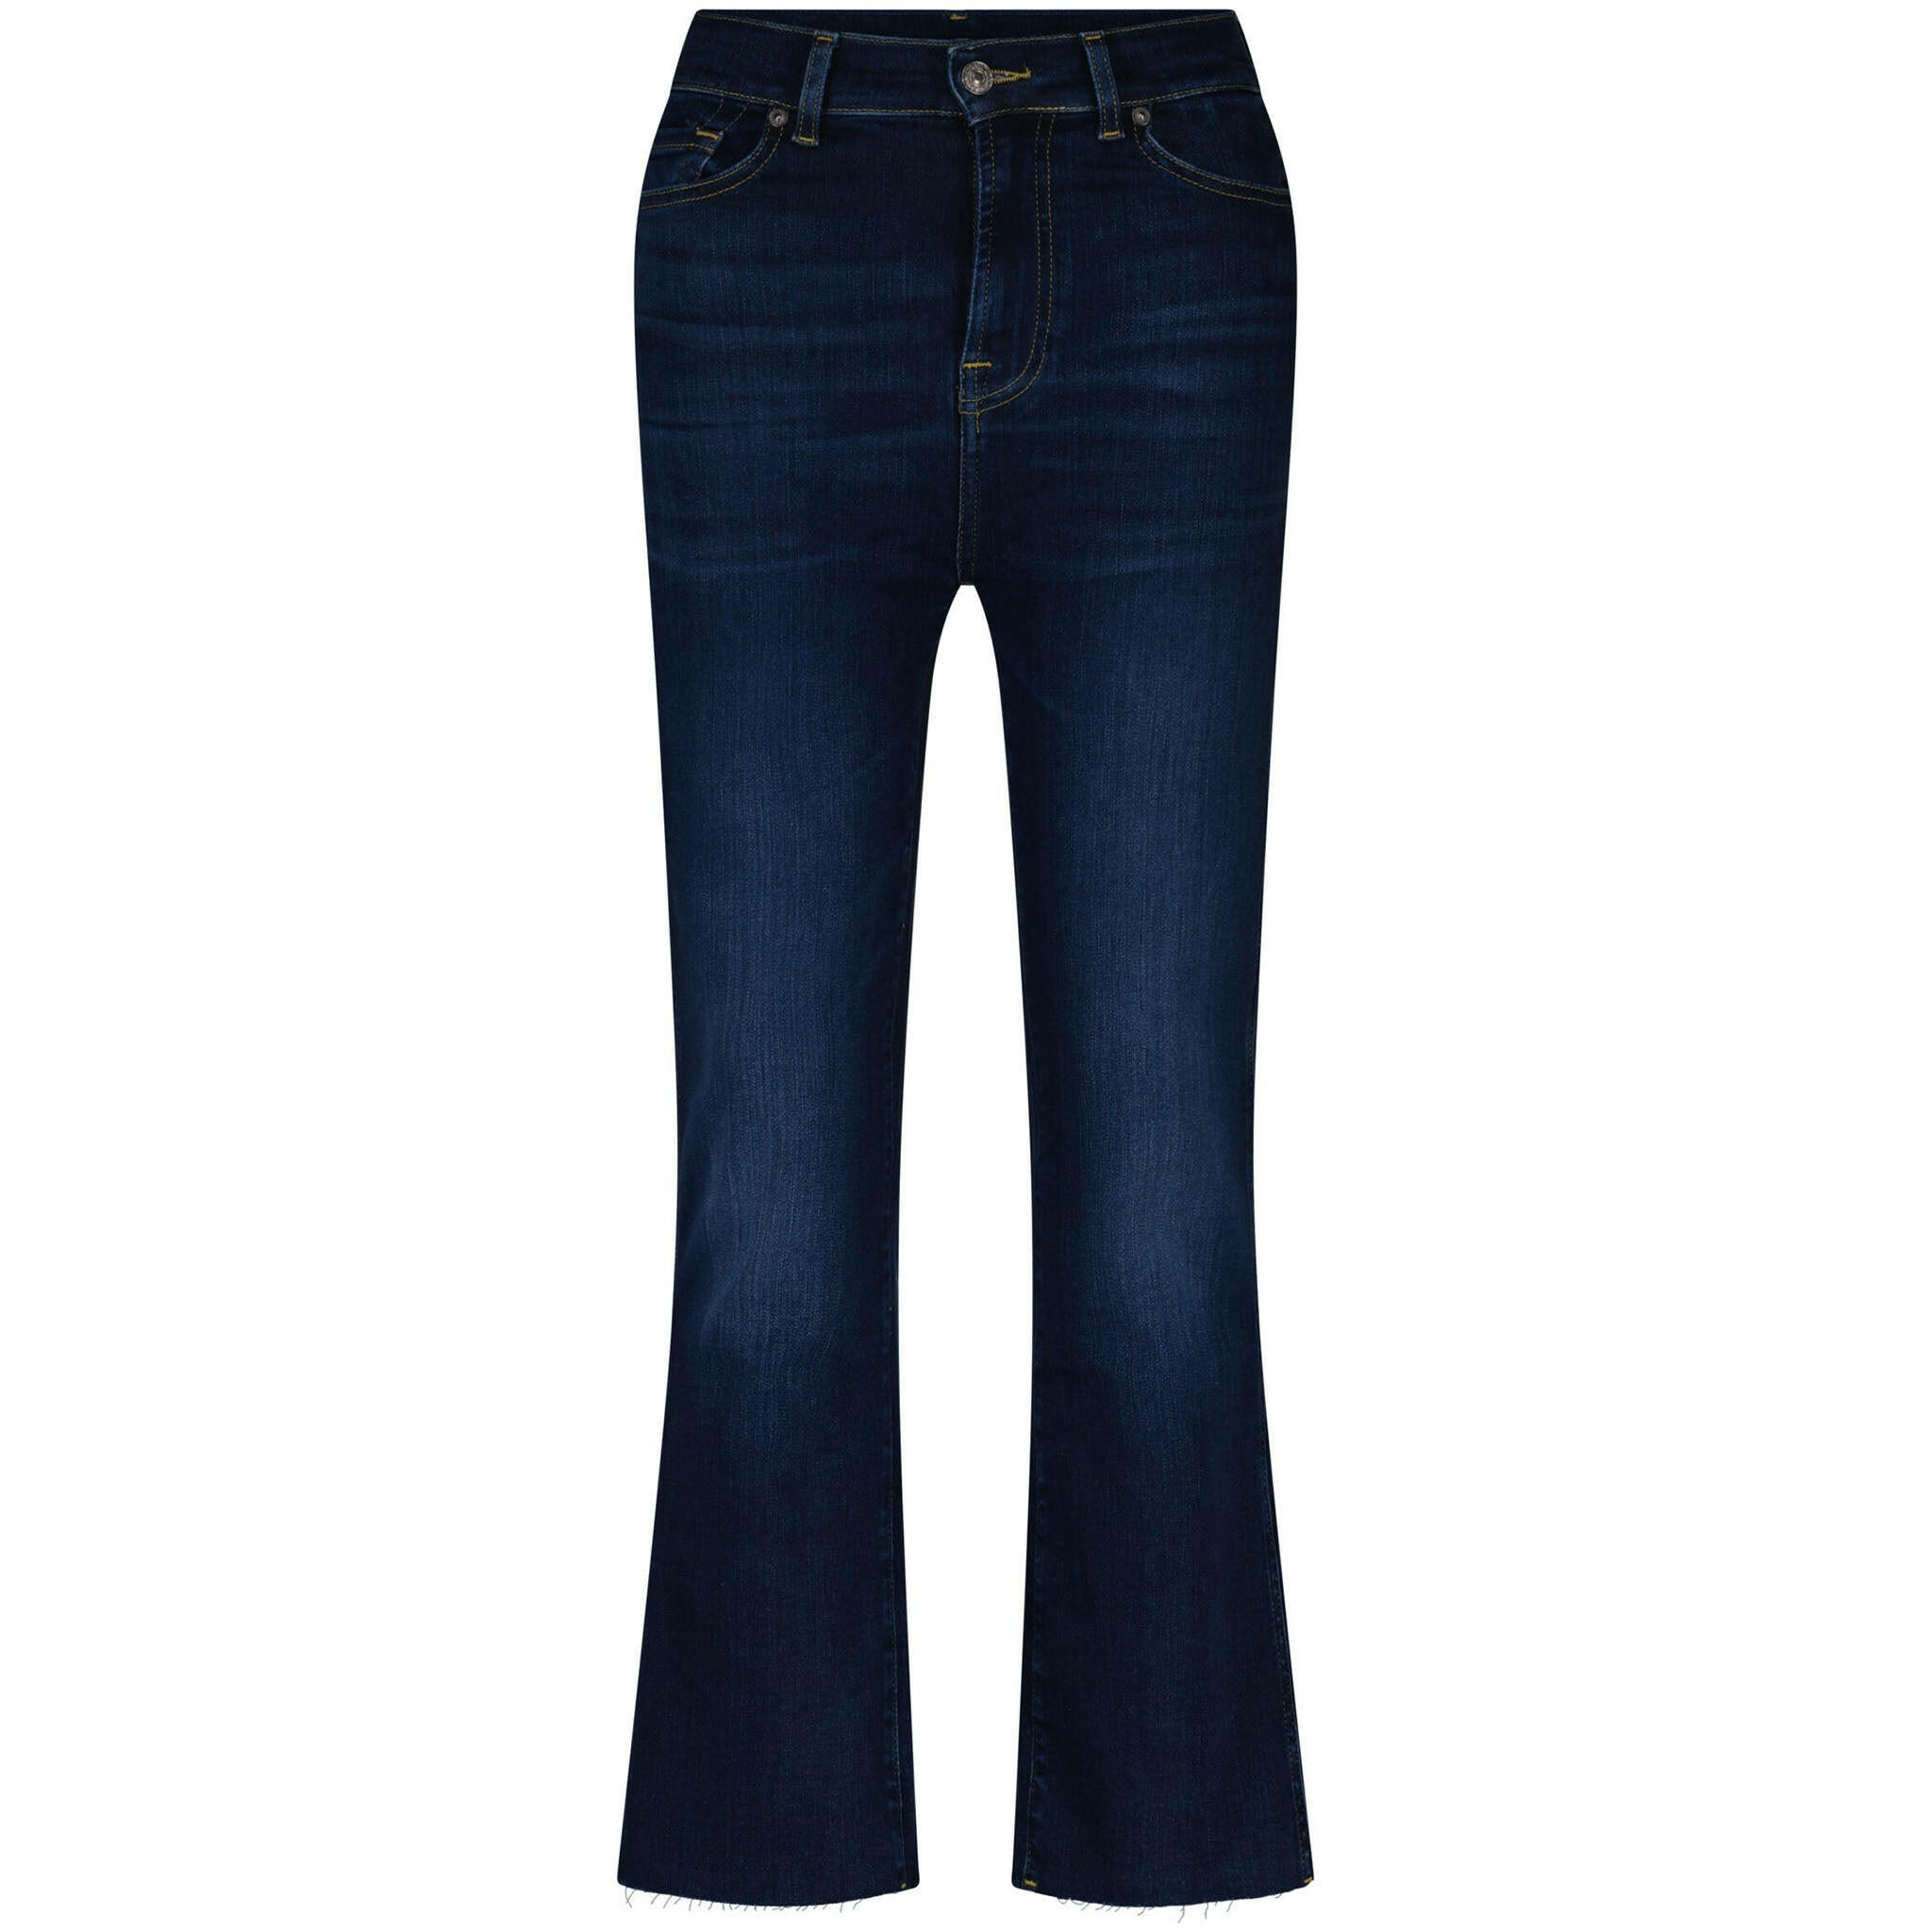 Flared Jeans in High-Waist